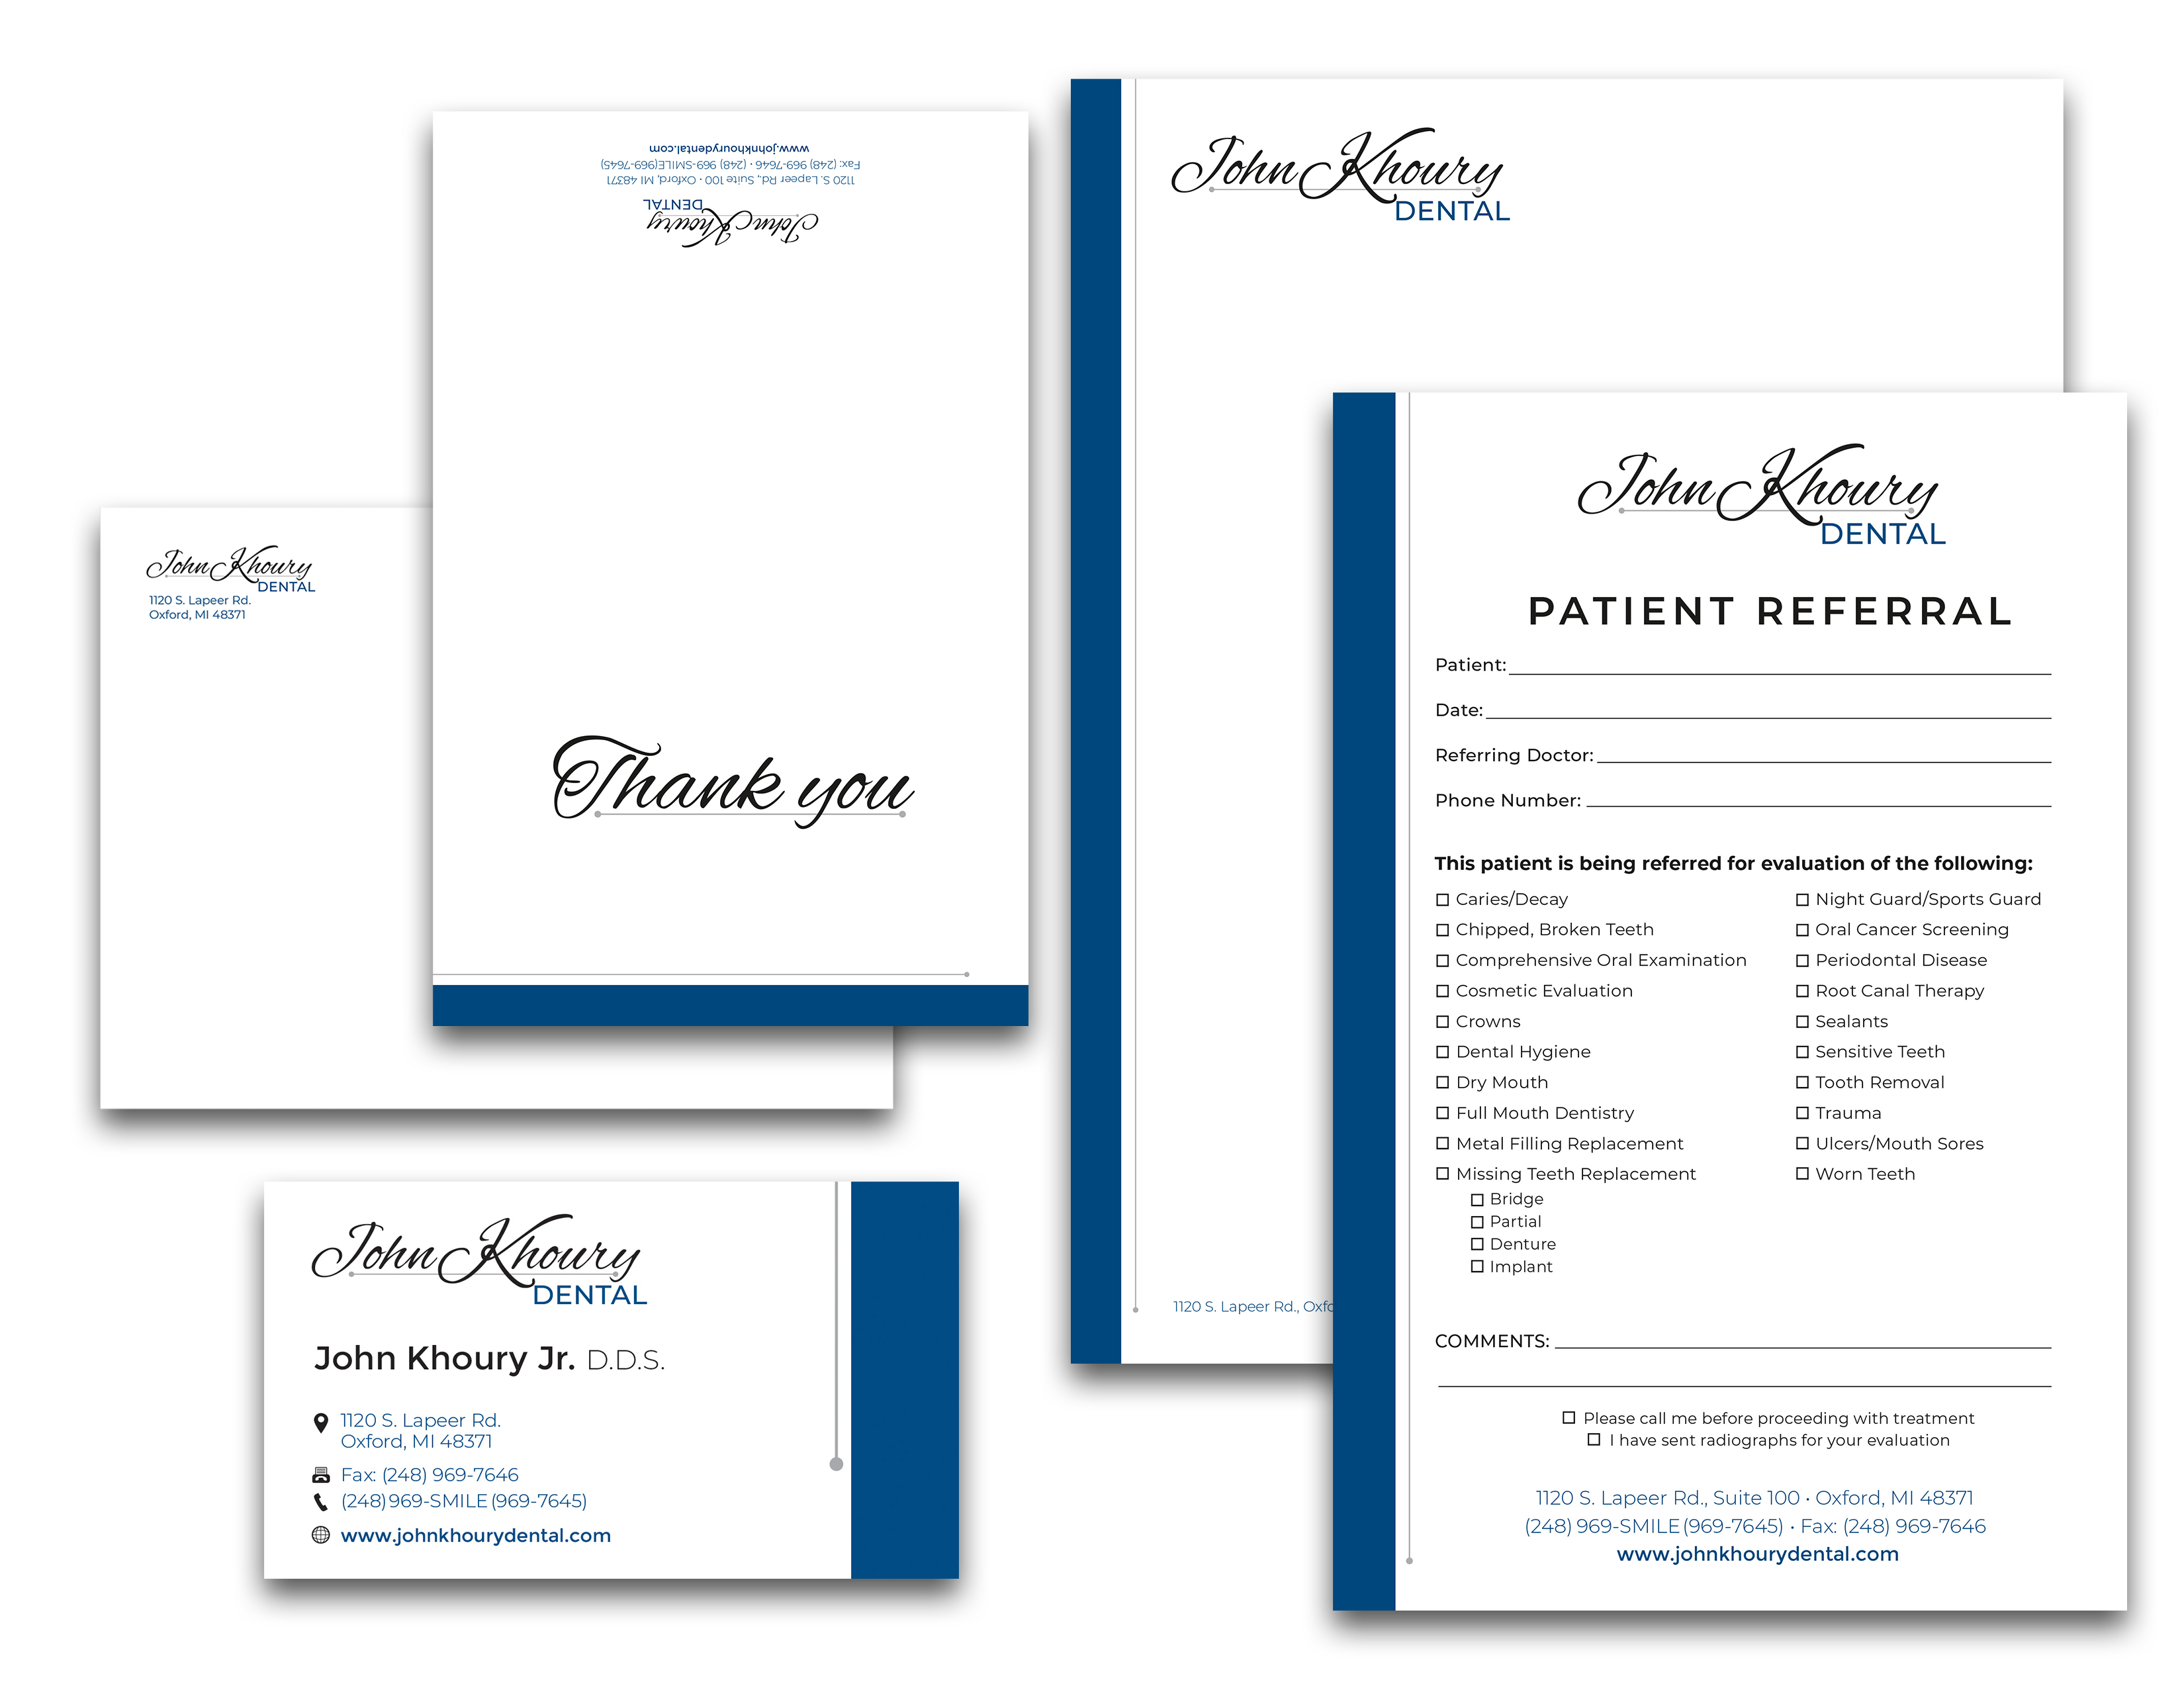 business cards, thank you notes and small envelopes, patient referral pad, letterhead